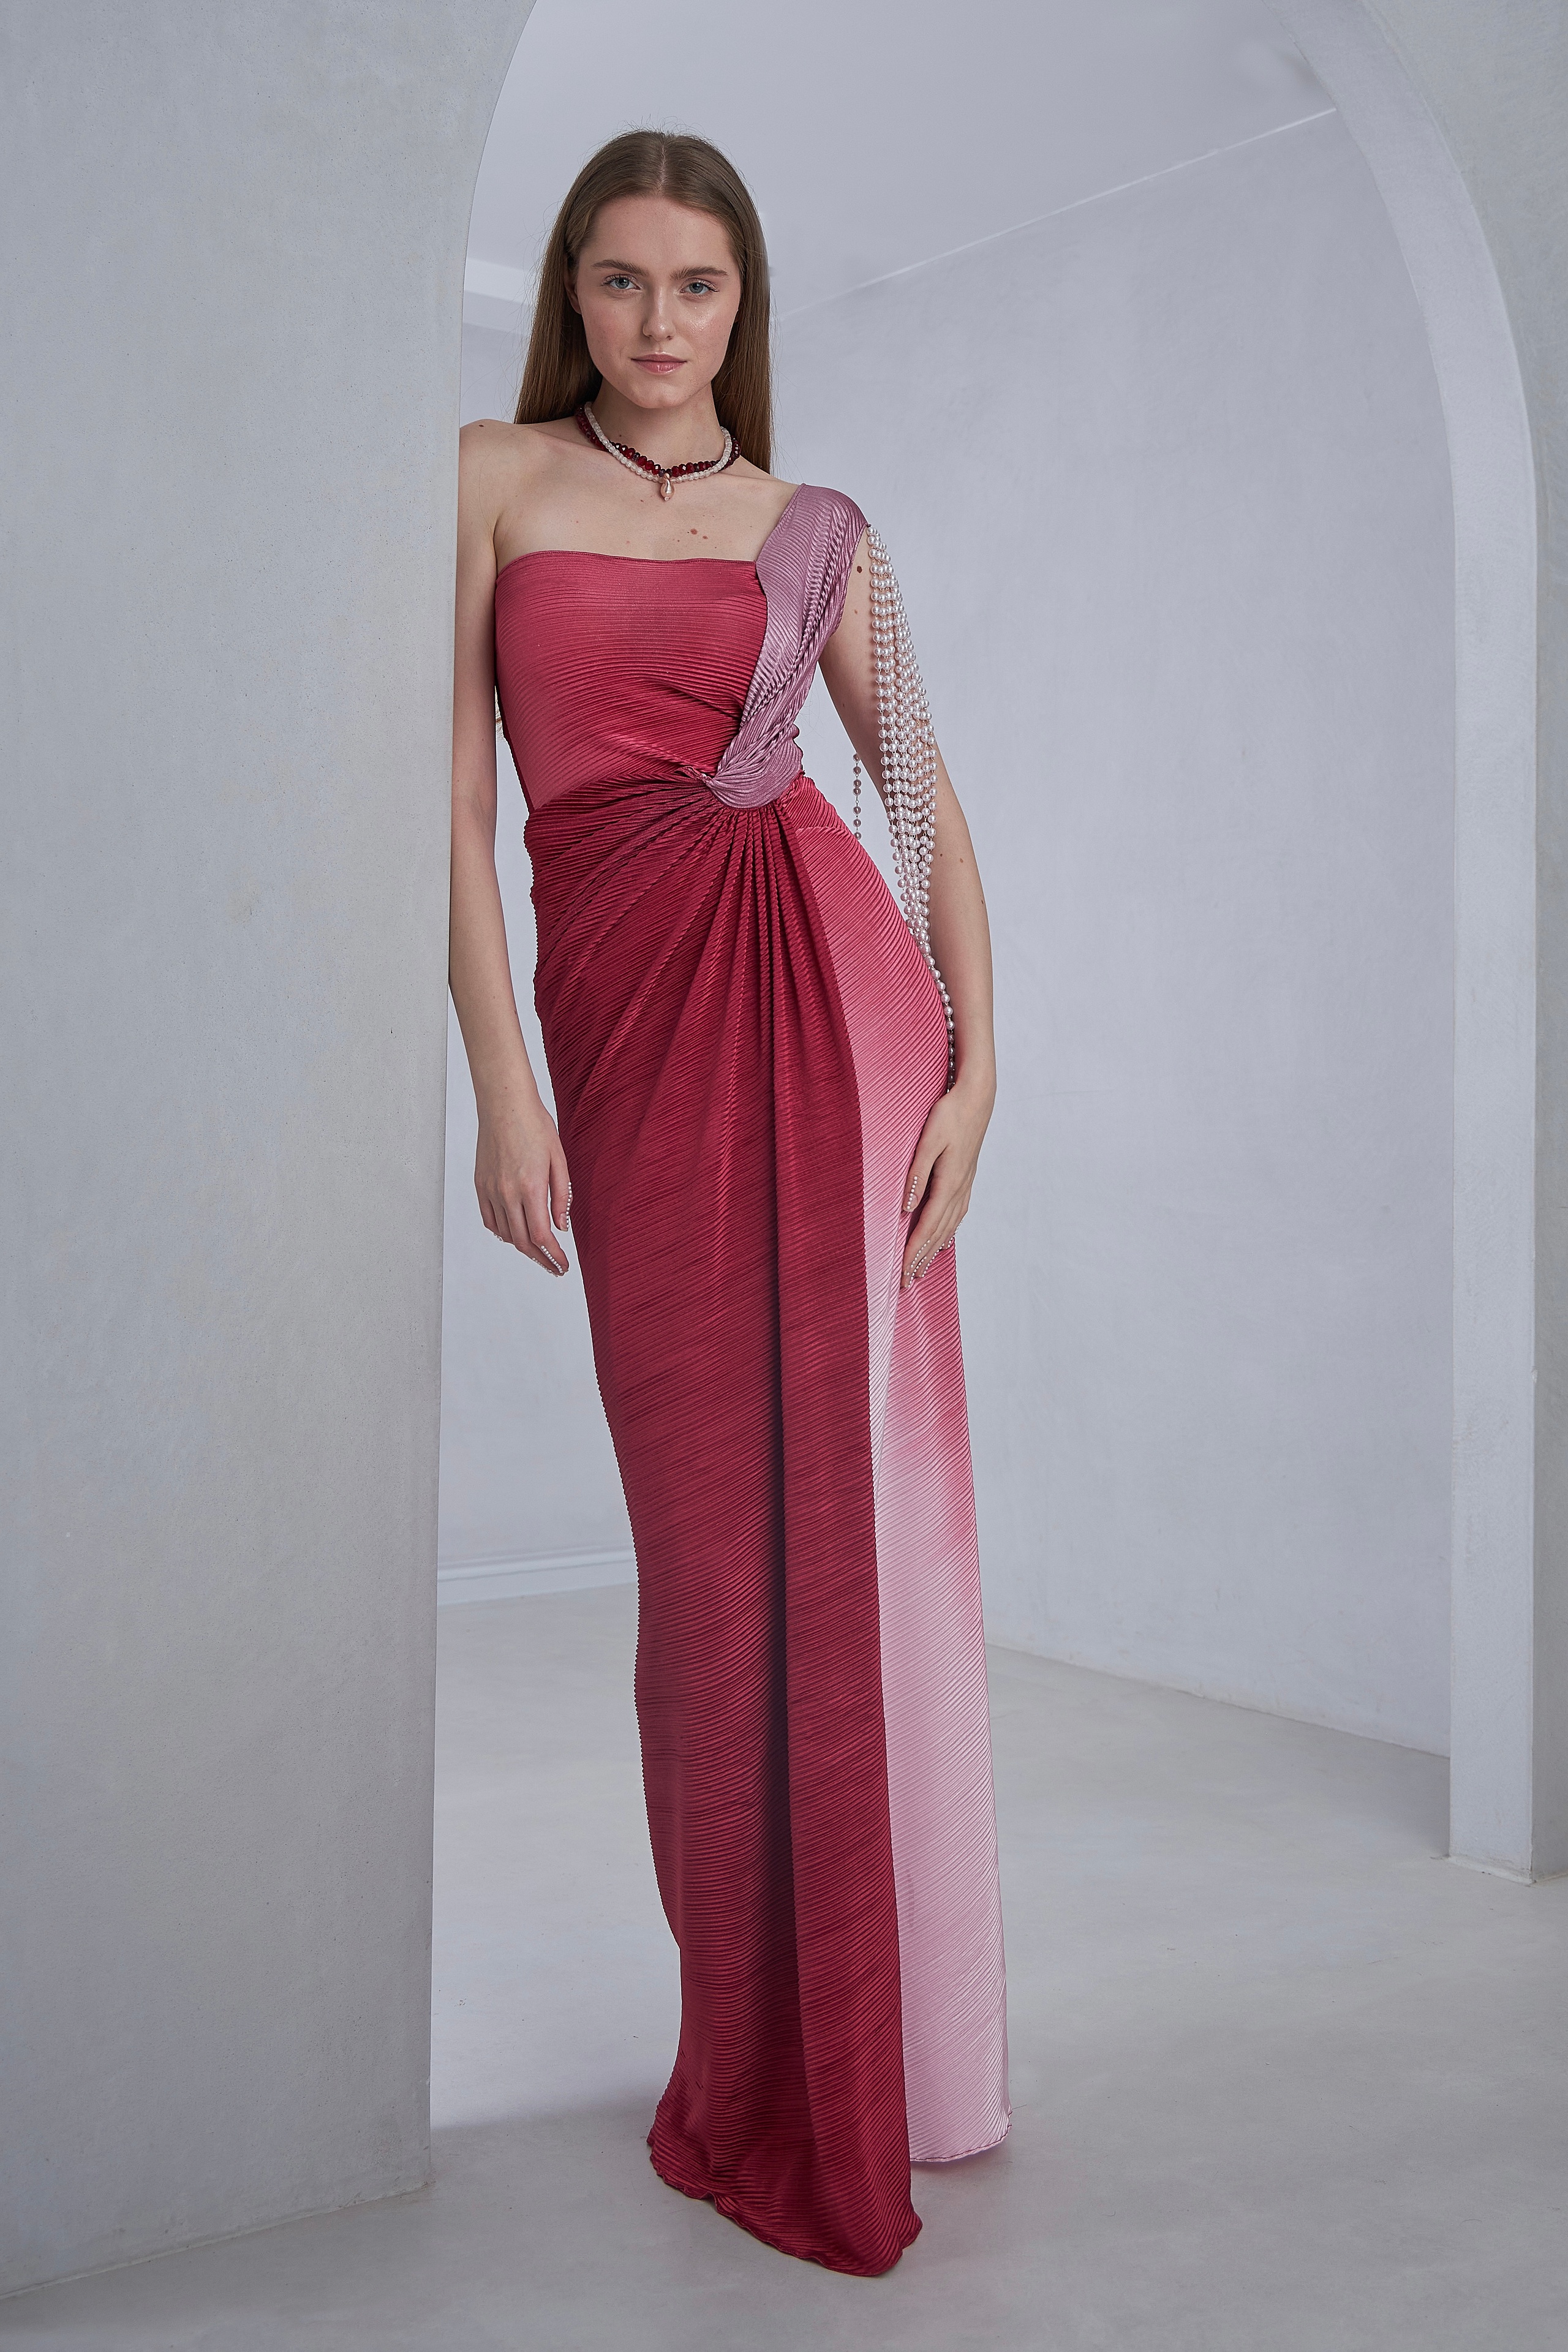 Shaded One Shoulder Gown With Pearl Tassels